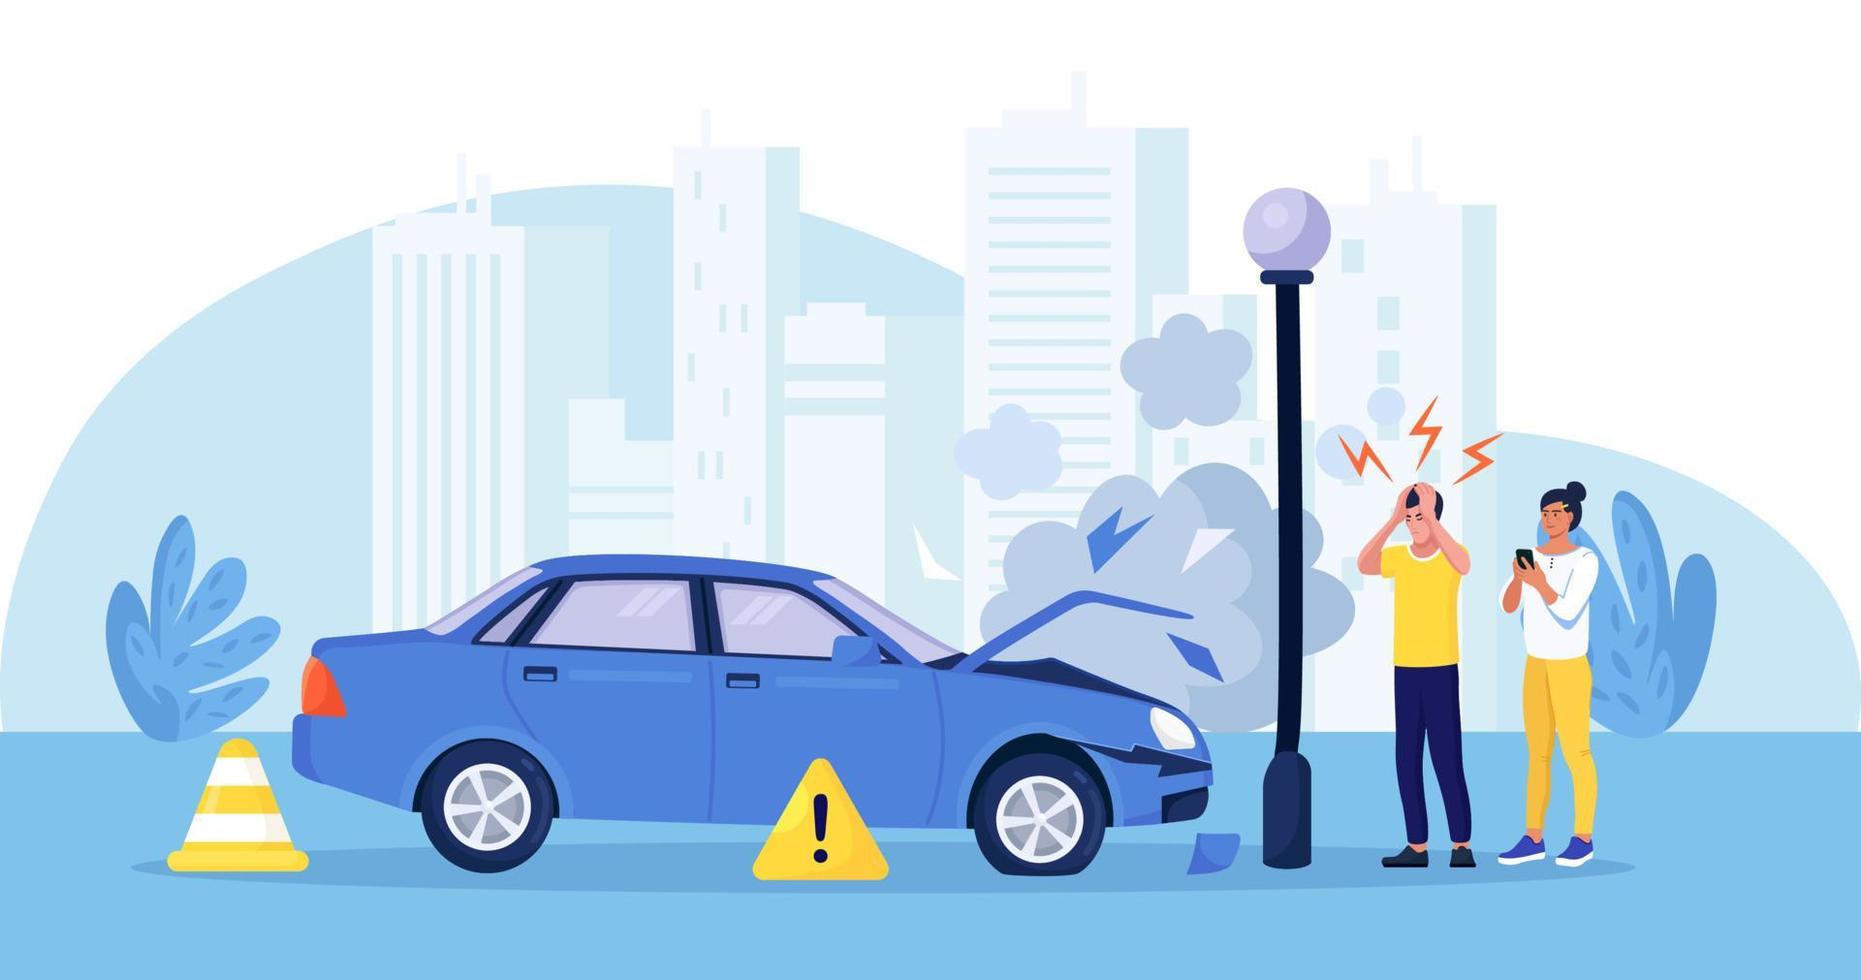 Upset drivers standing near auto. Road traffic accident. Car crashed into pole on the road. Vehicle is broken in the city. Smashed auto on highway. Collision of vehicles, wreck. Automobile damaged vector